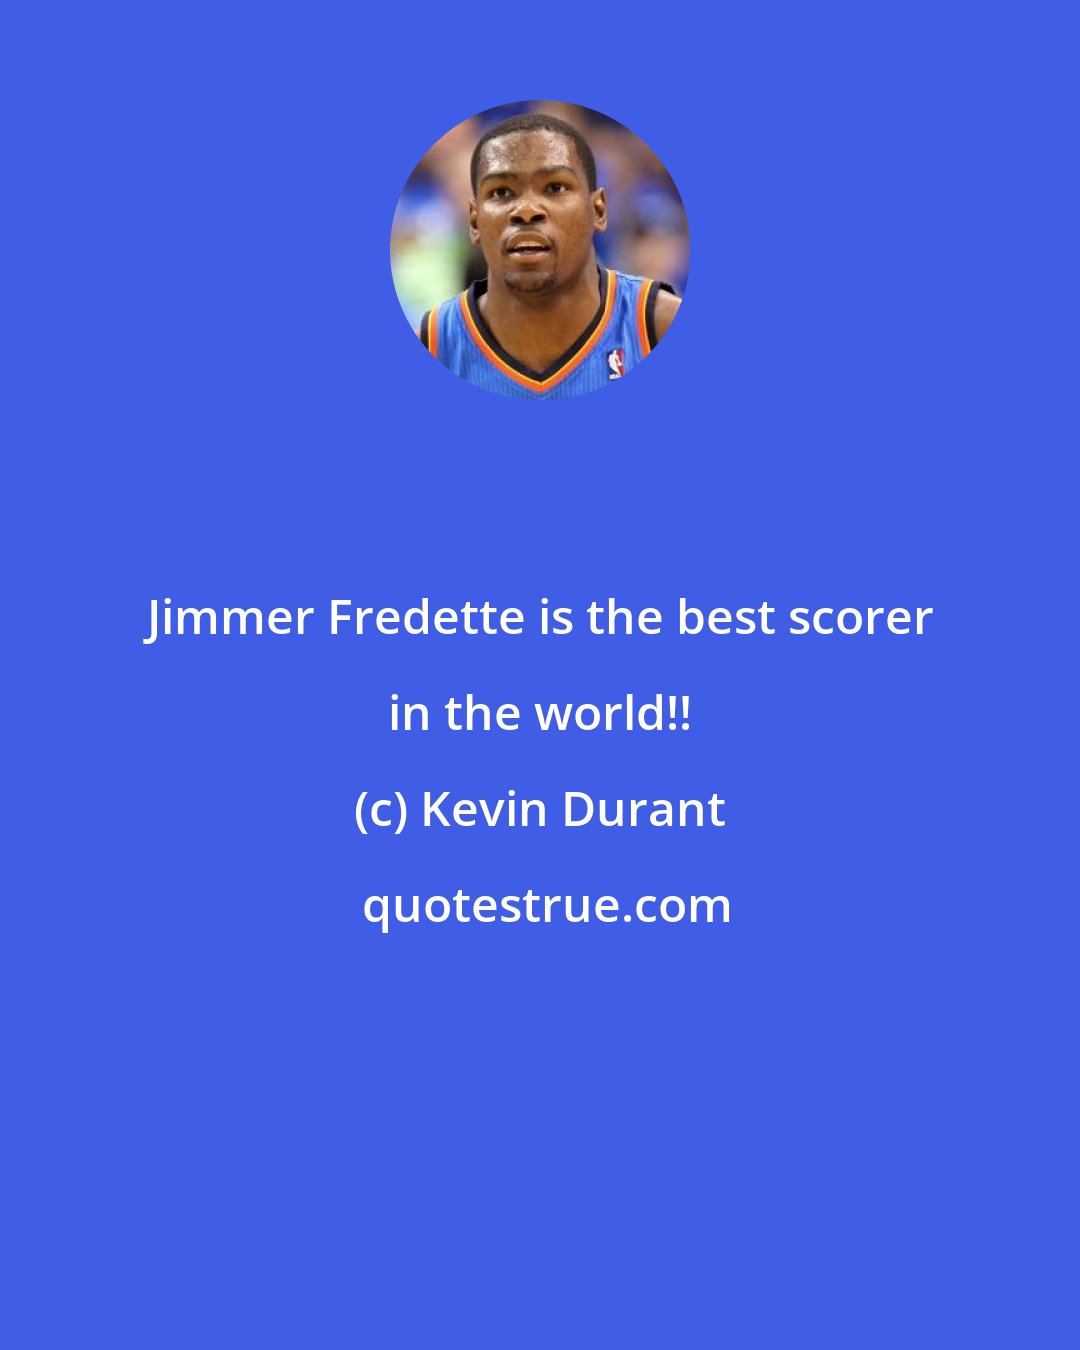 Kevin Durant: Jimmer Fredette is the best scorer in the world!!